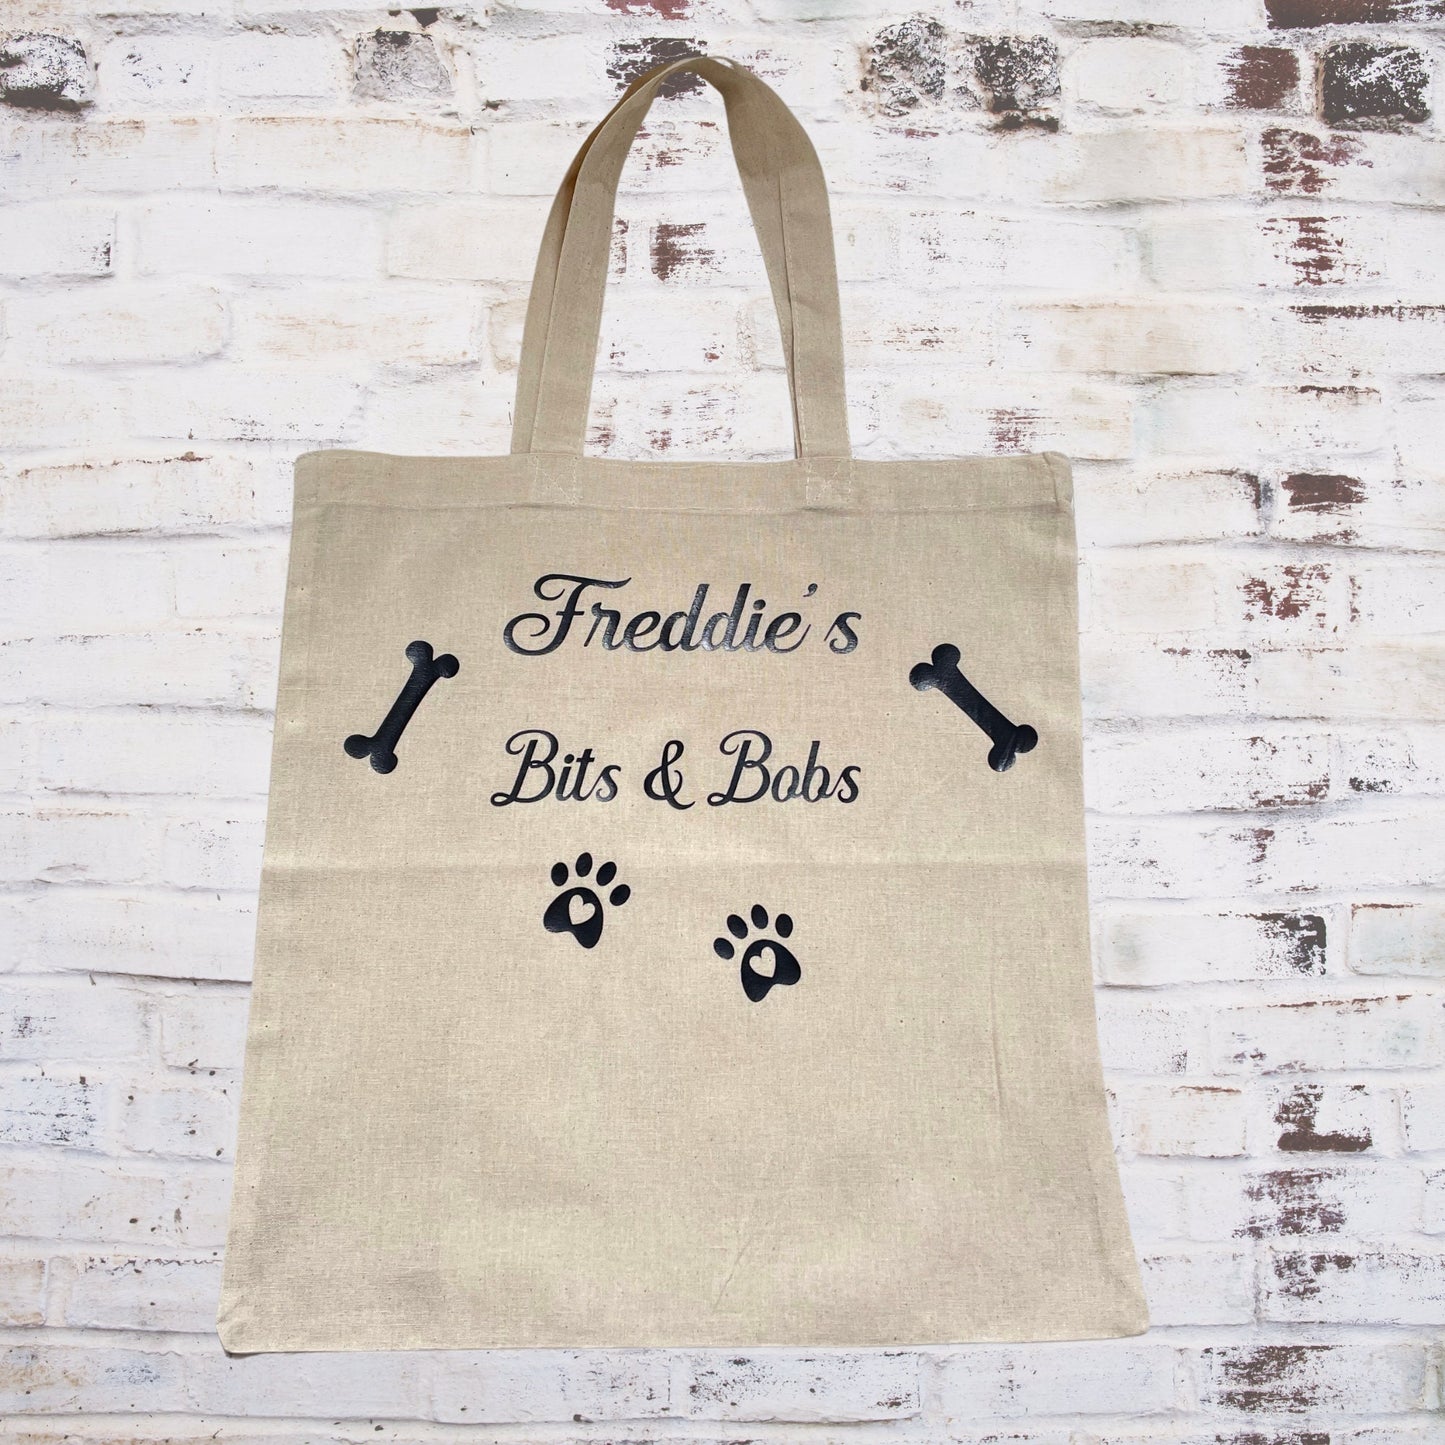 Personalised Dog Daycare Cotton Tote Bag